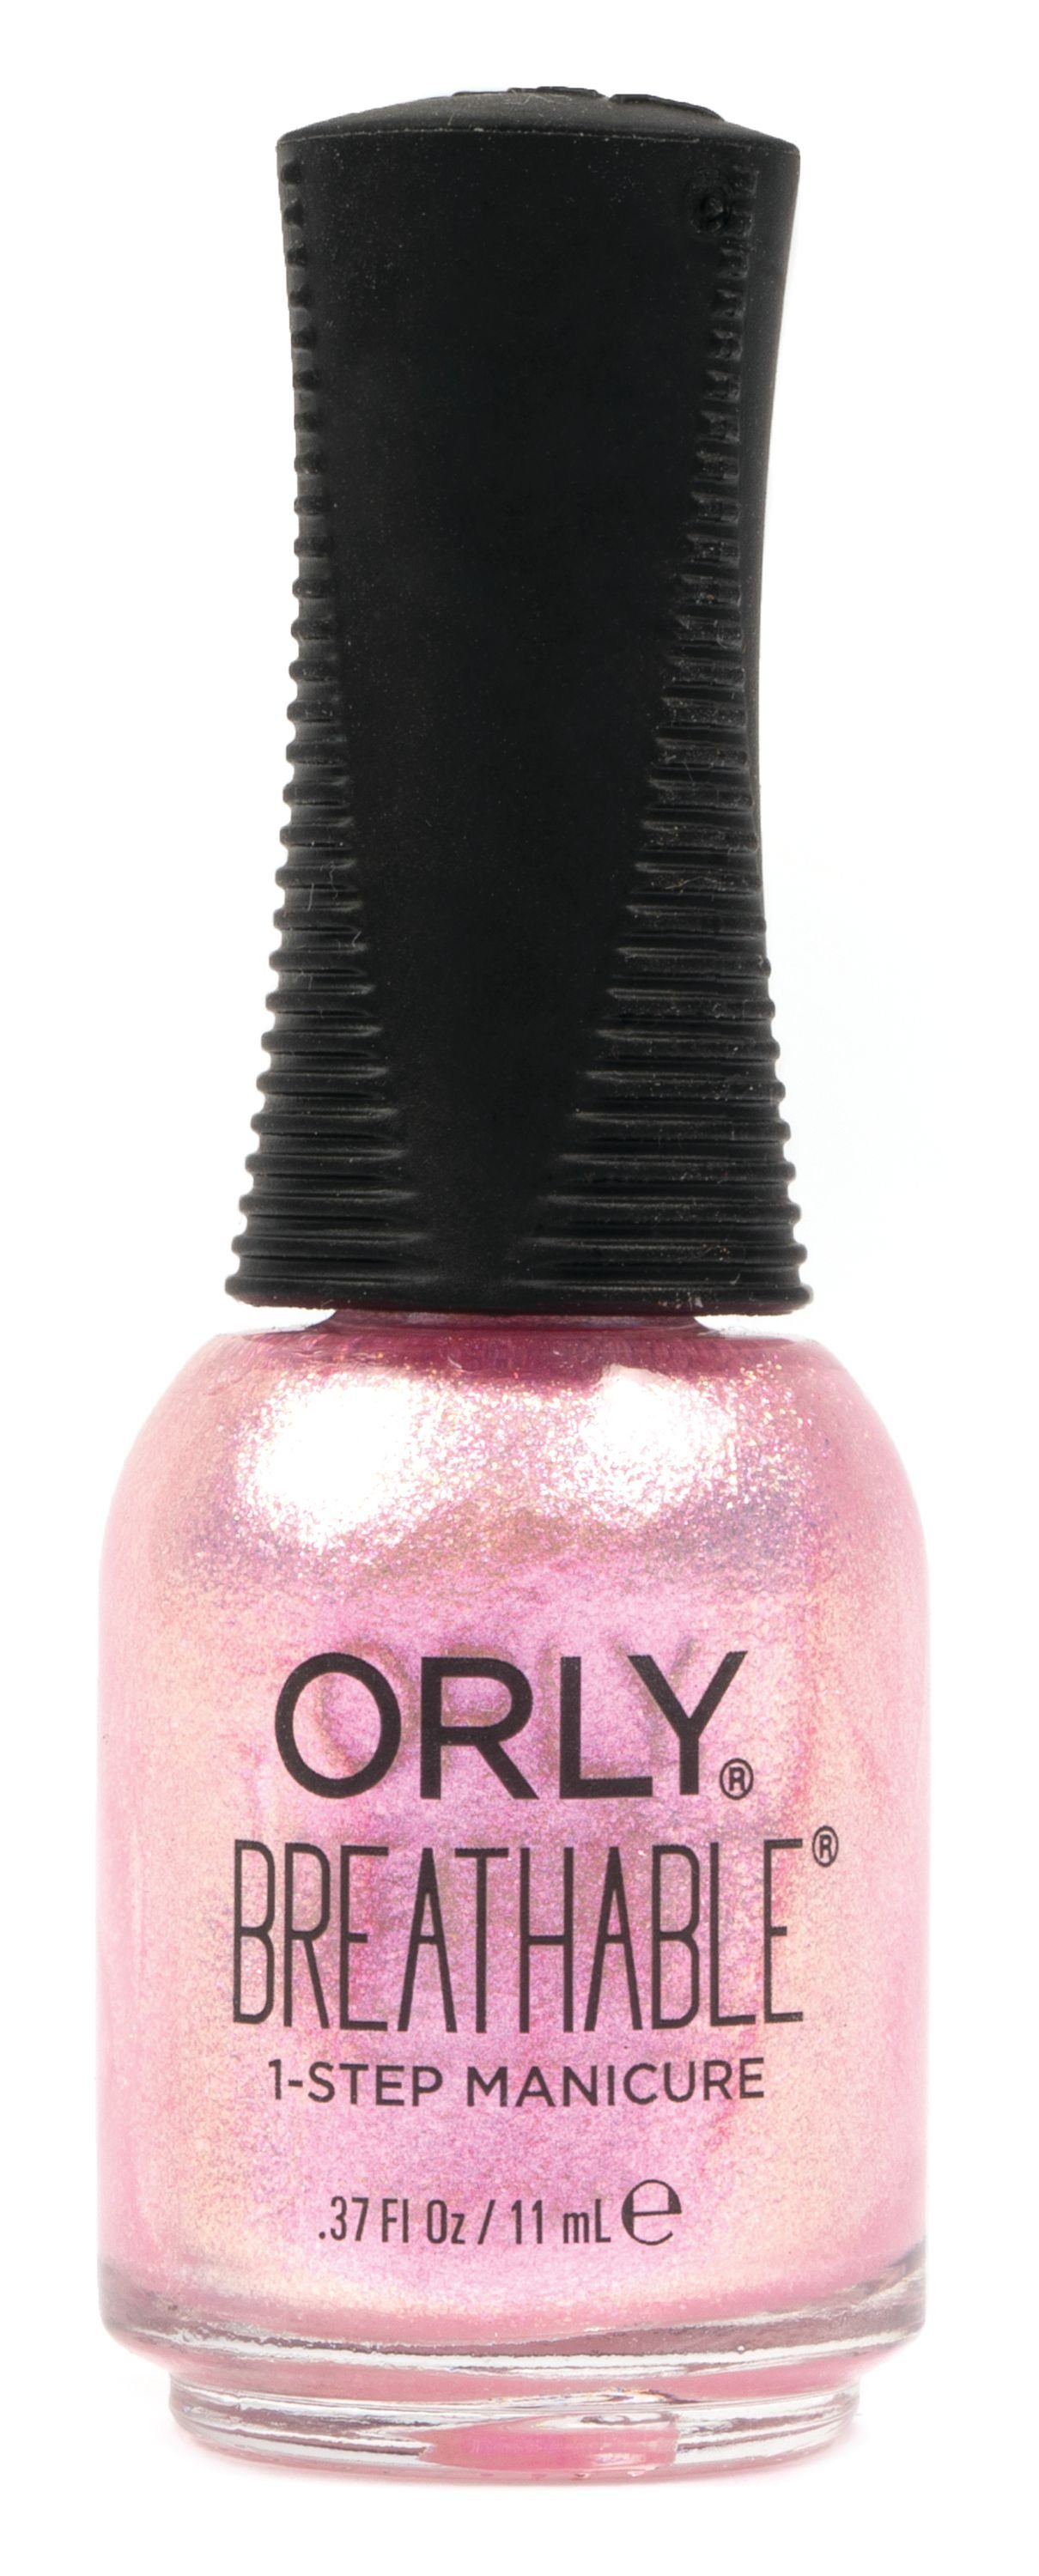 Nagellack Breathable ORLY ENOUGH, 11 ORLY ml JET CAN'T